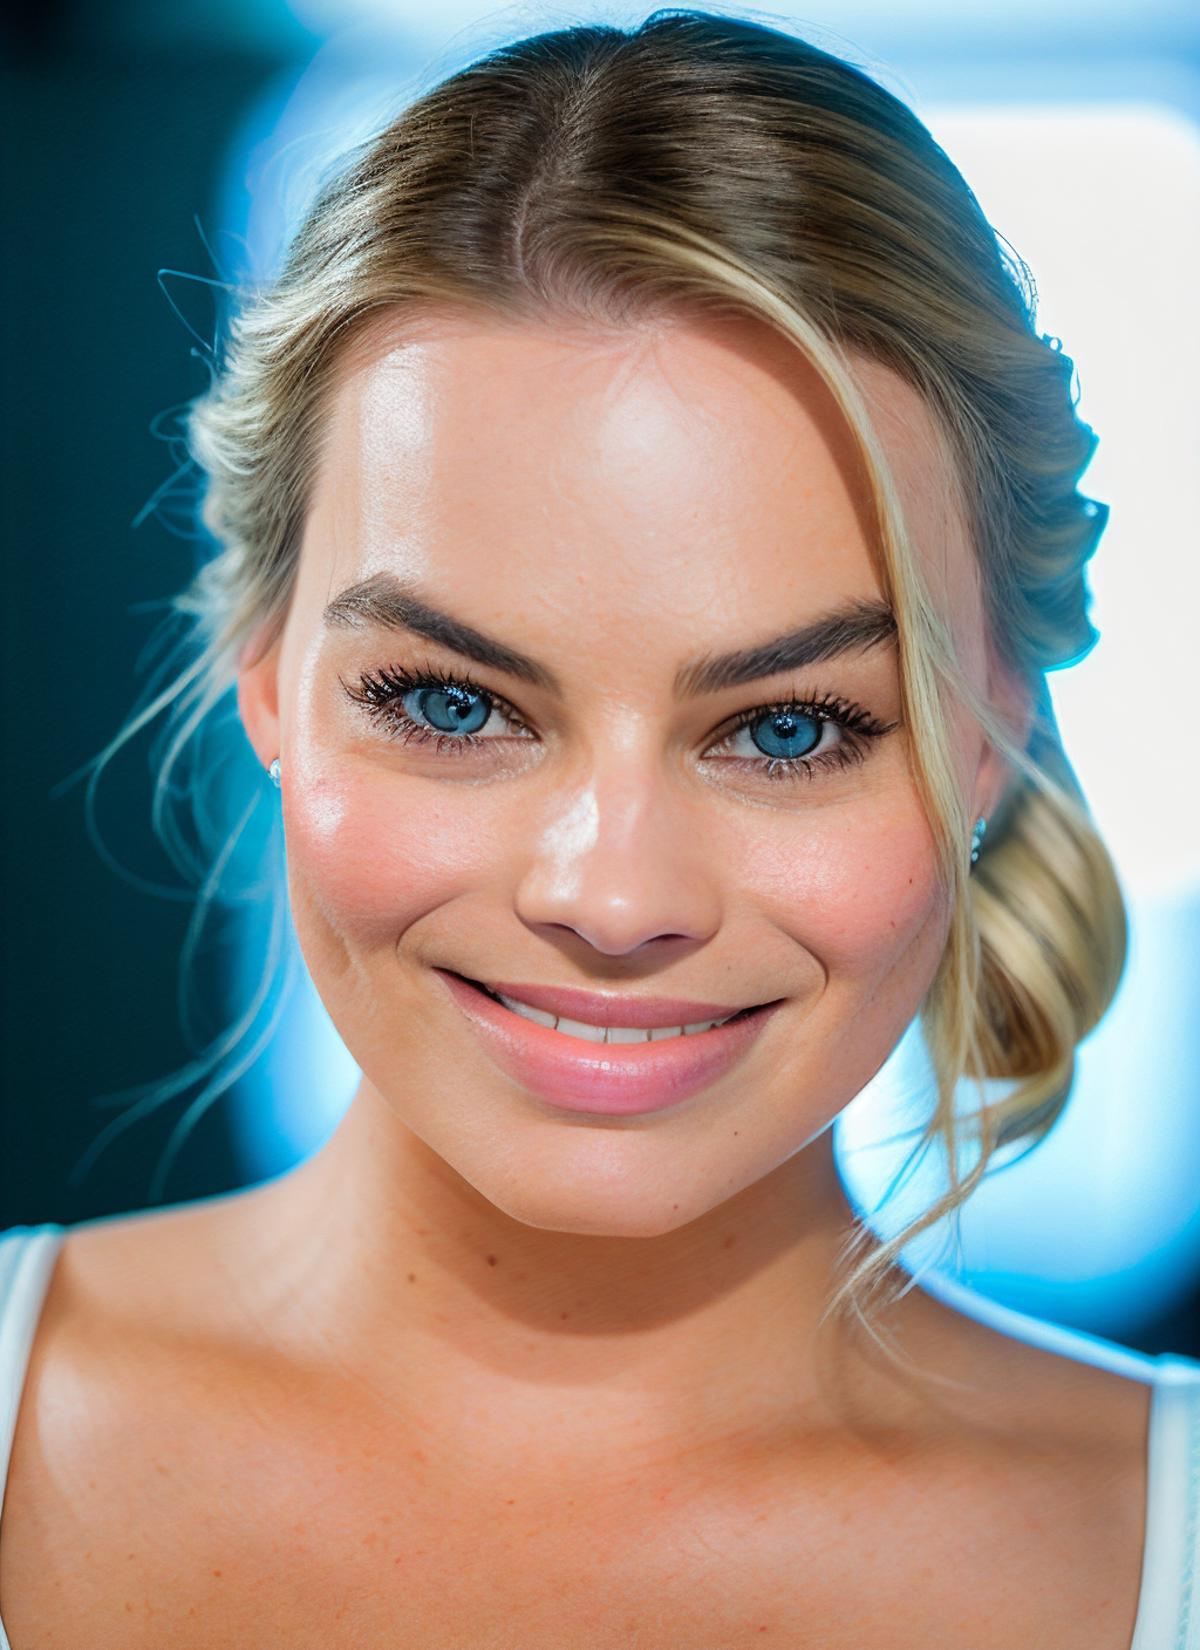 Margot Robbie (3 in 1 characters: Herself, Harley Quinn and Barbie) image by astragartist